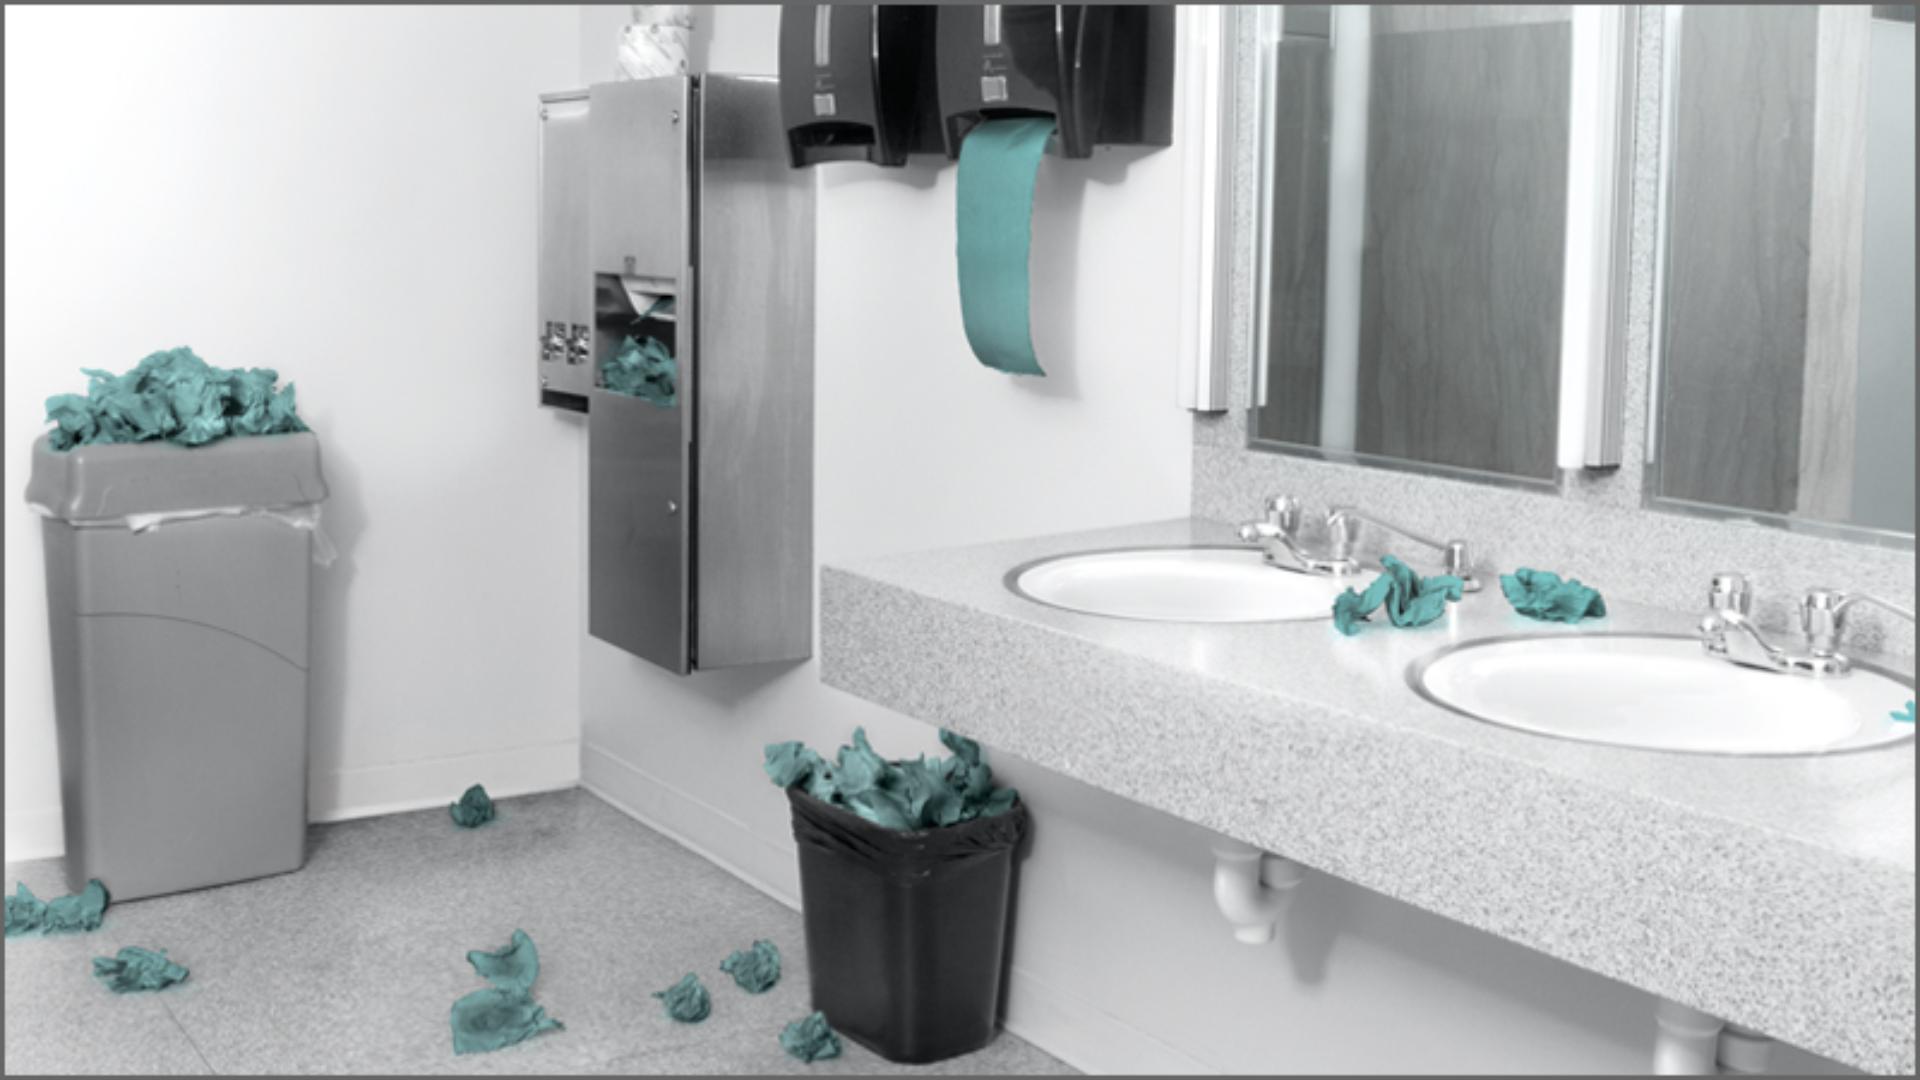 Image shows a washroom covered in litter